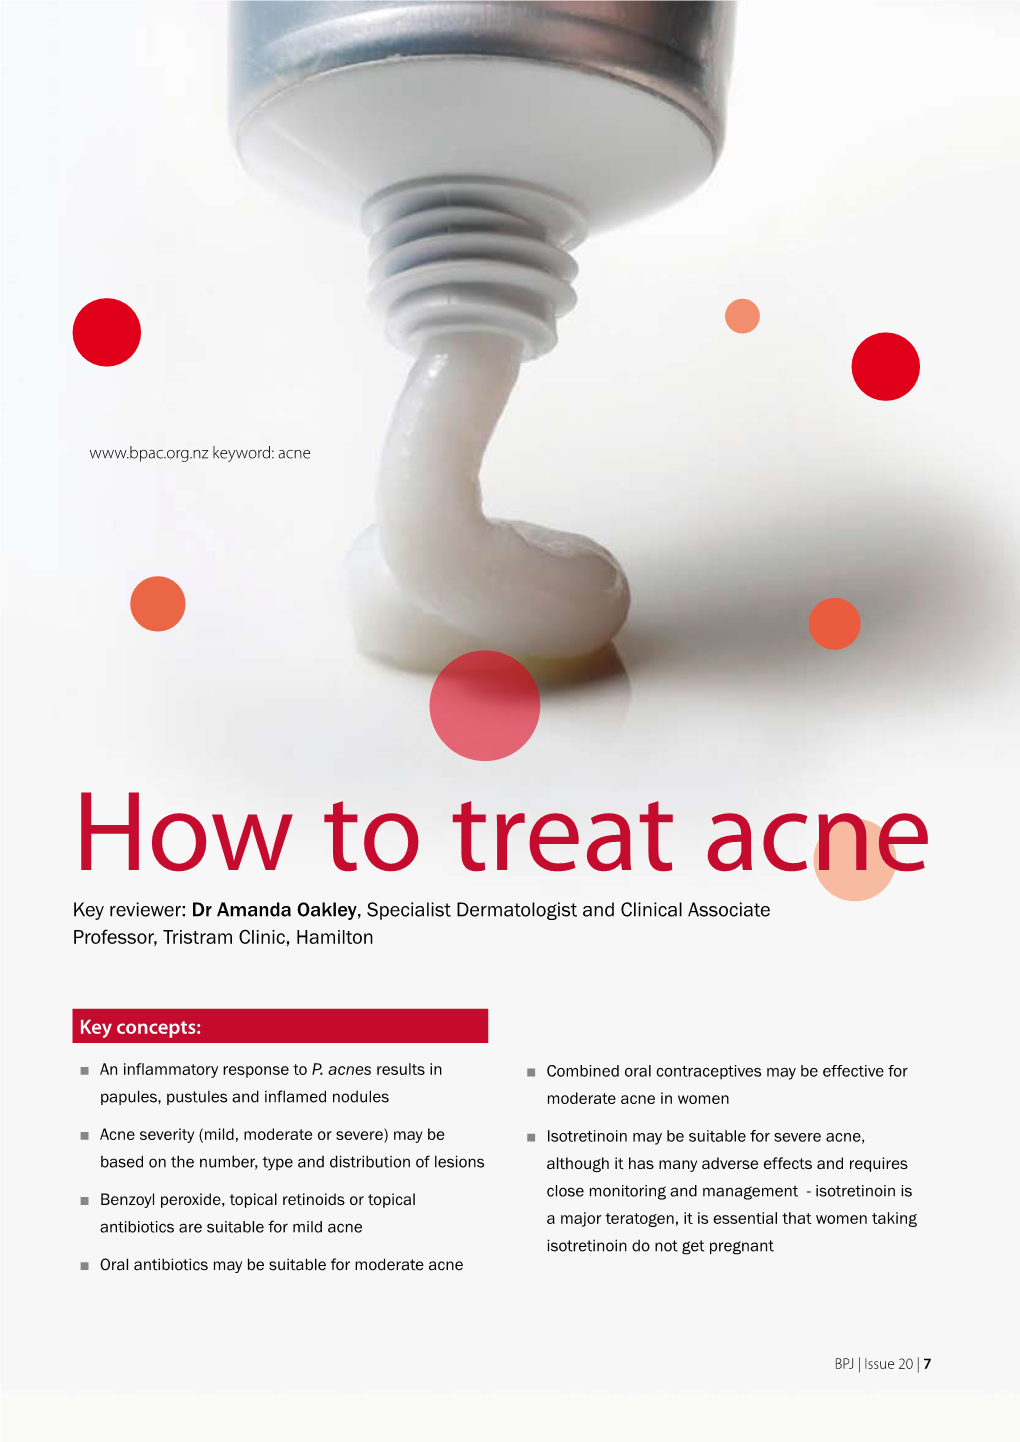 How to Treat Acne Key Reviewer: Dr Amanda Oakley, Specialist Dermatologist and Clinical Associate Professor, Tristram Clinic, Hamilton